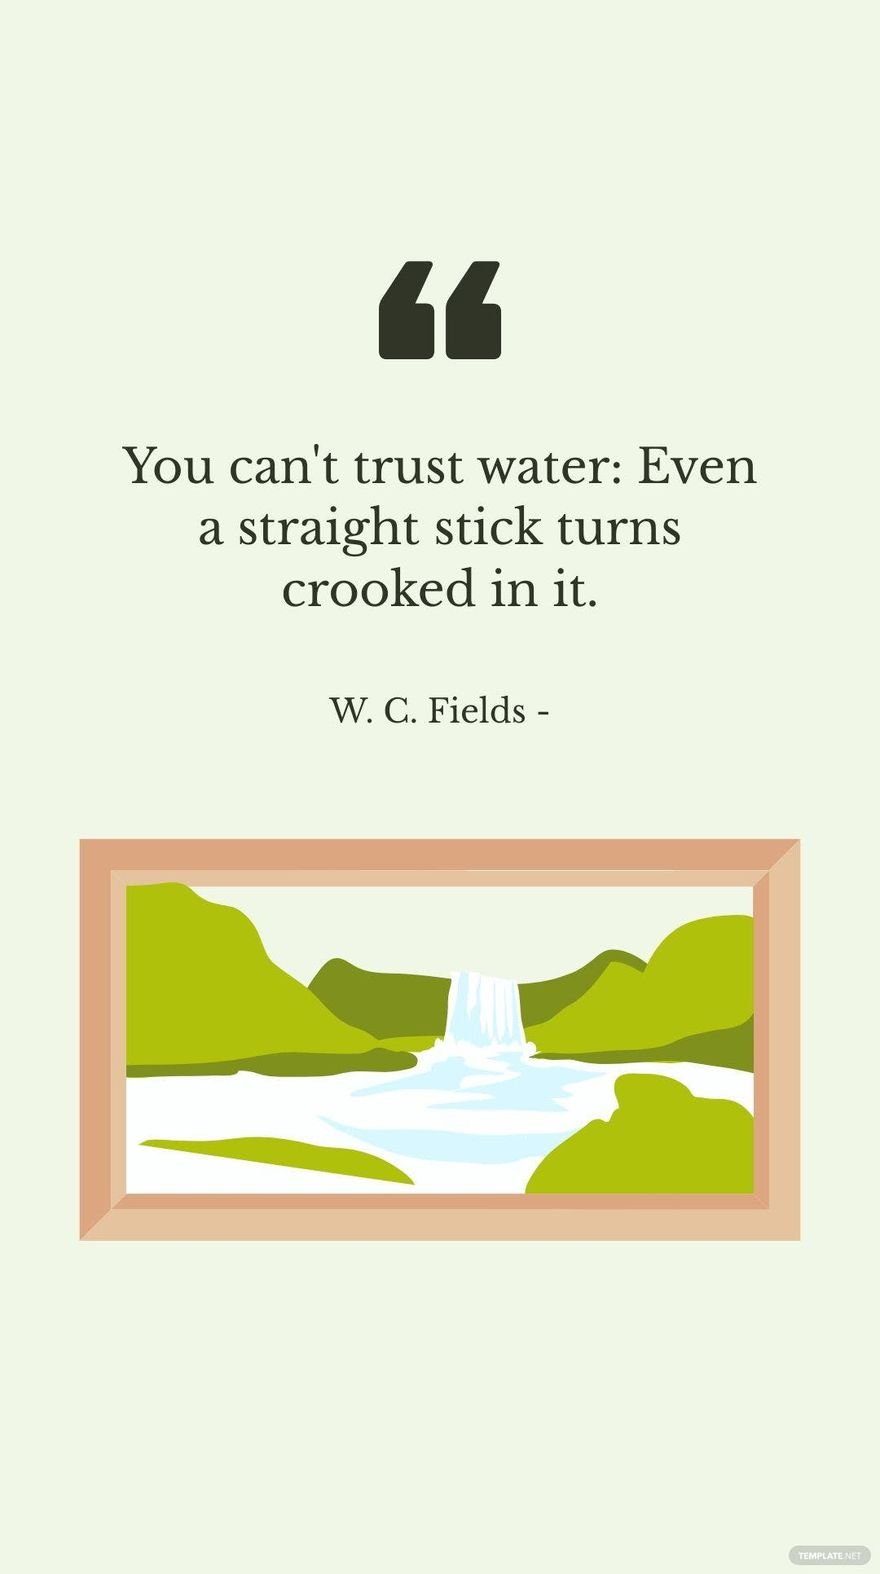 Free W. C. Fields - You can't trust water: Even a straight stick turns crooked in it. in JPG